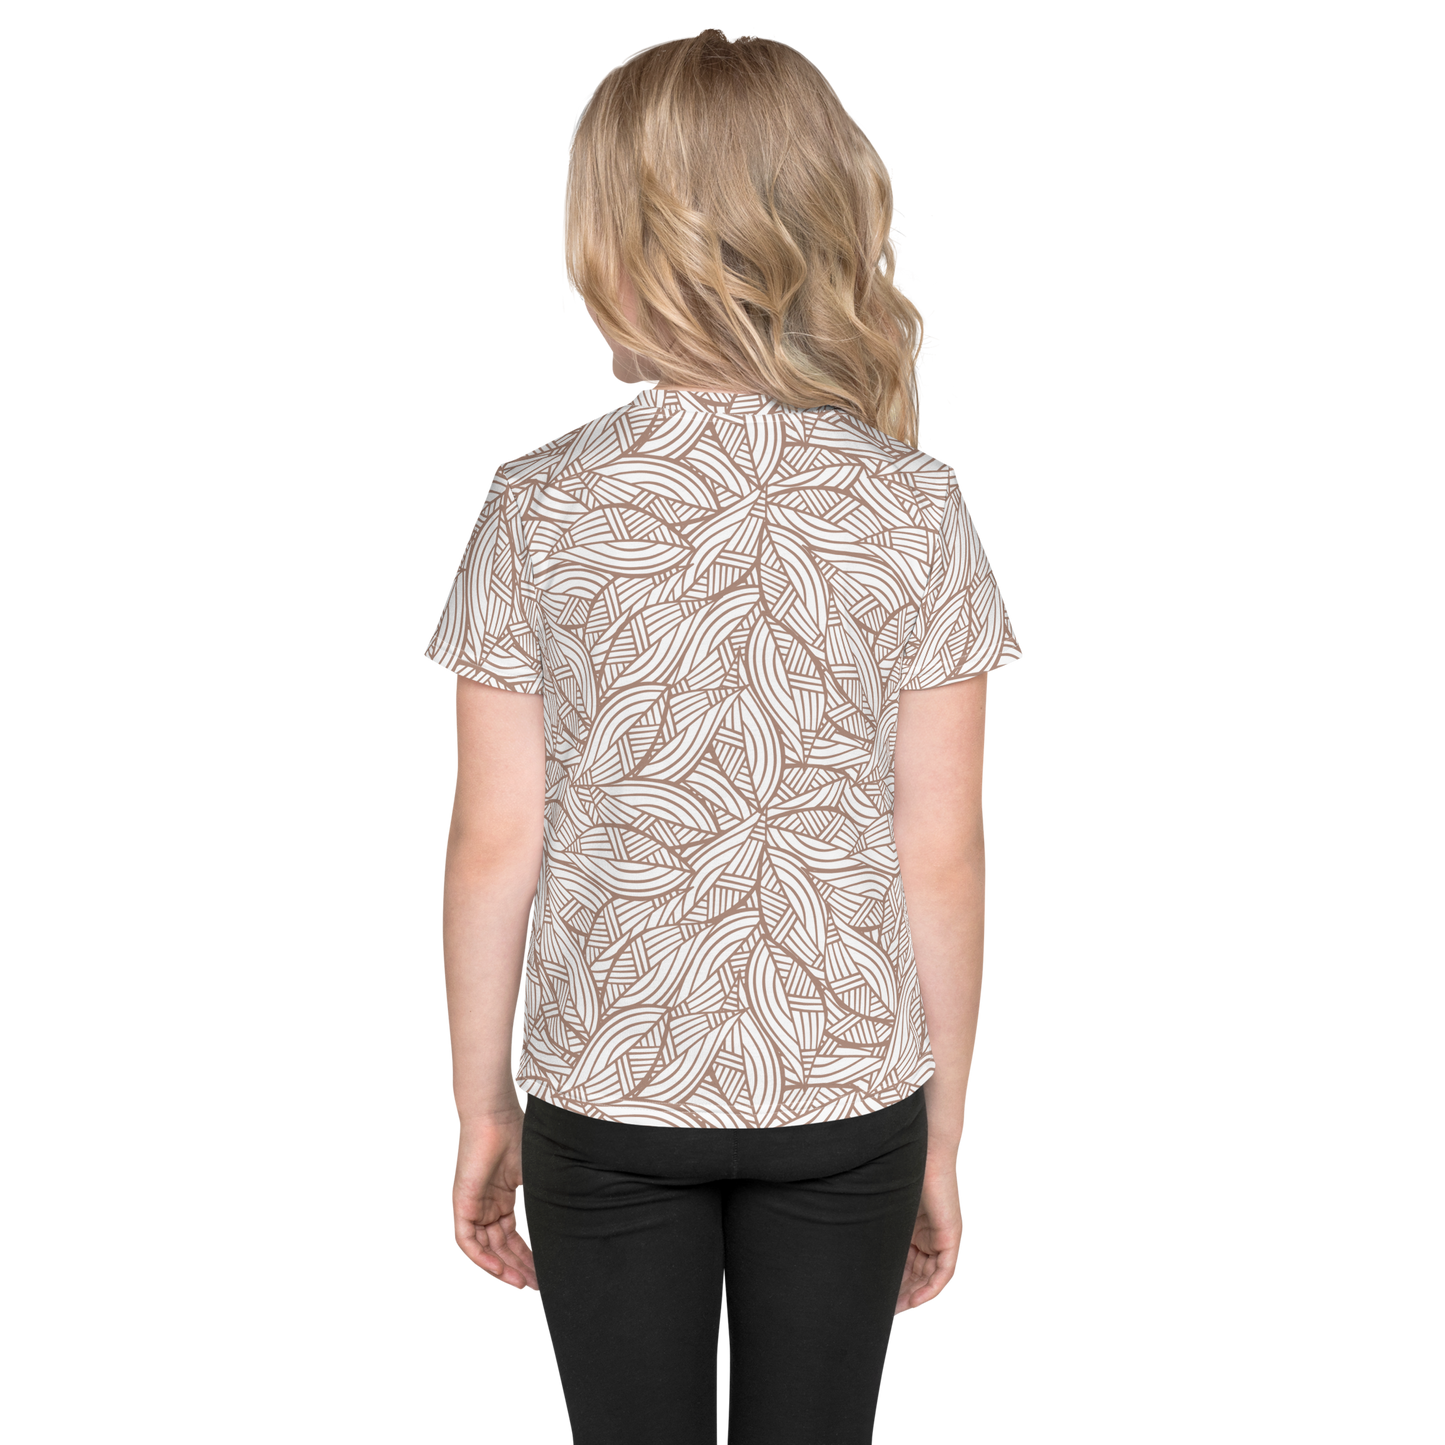 Colorful Fall Leaves | Seamless Patterns | All-Over Print Kids Crew Neck T-Shirt - #3